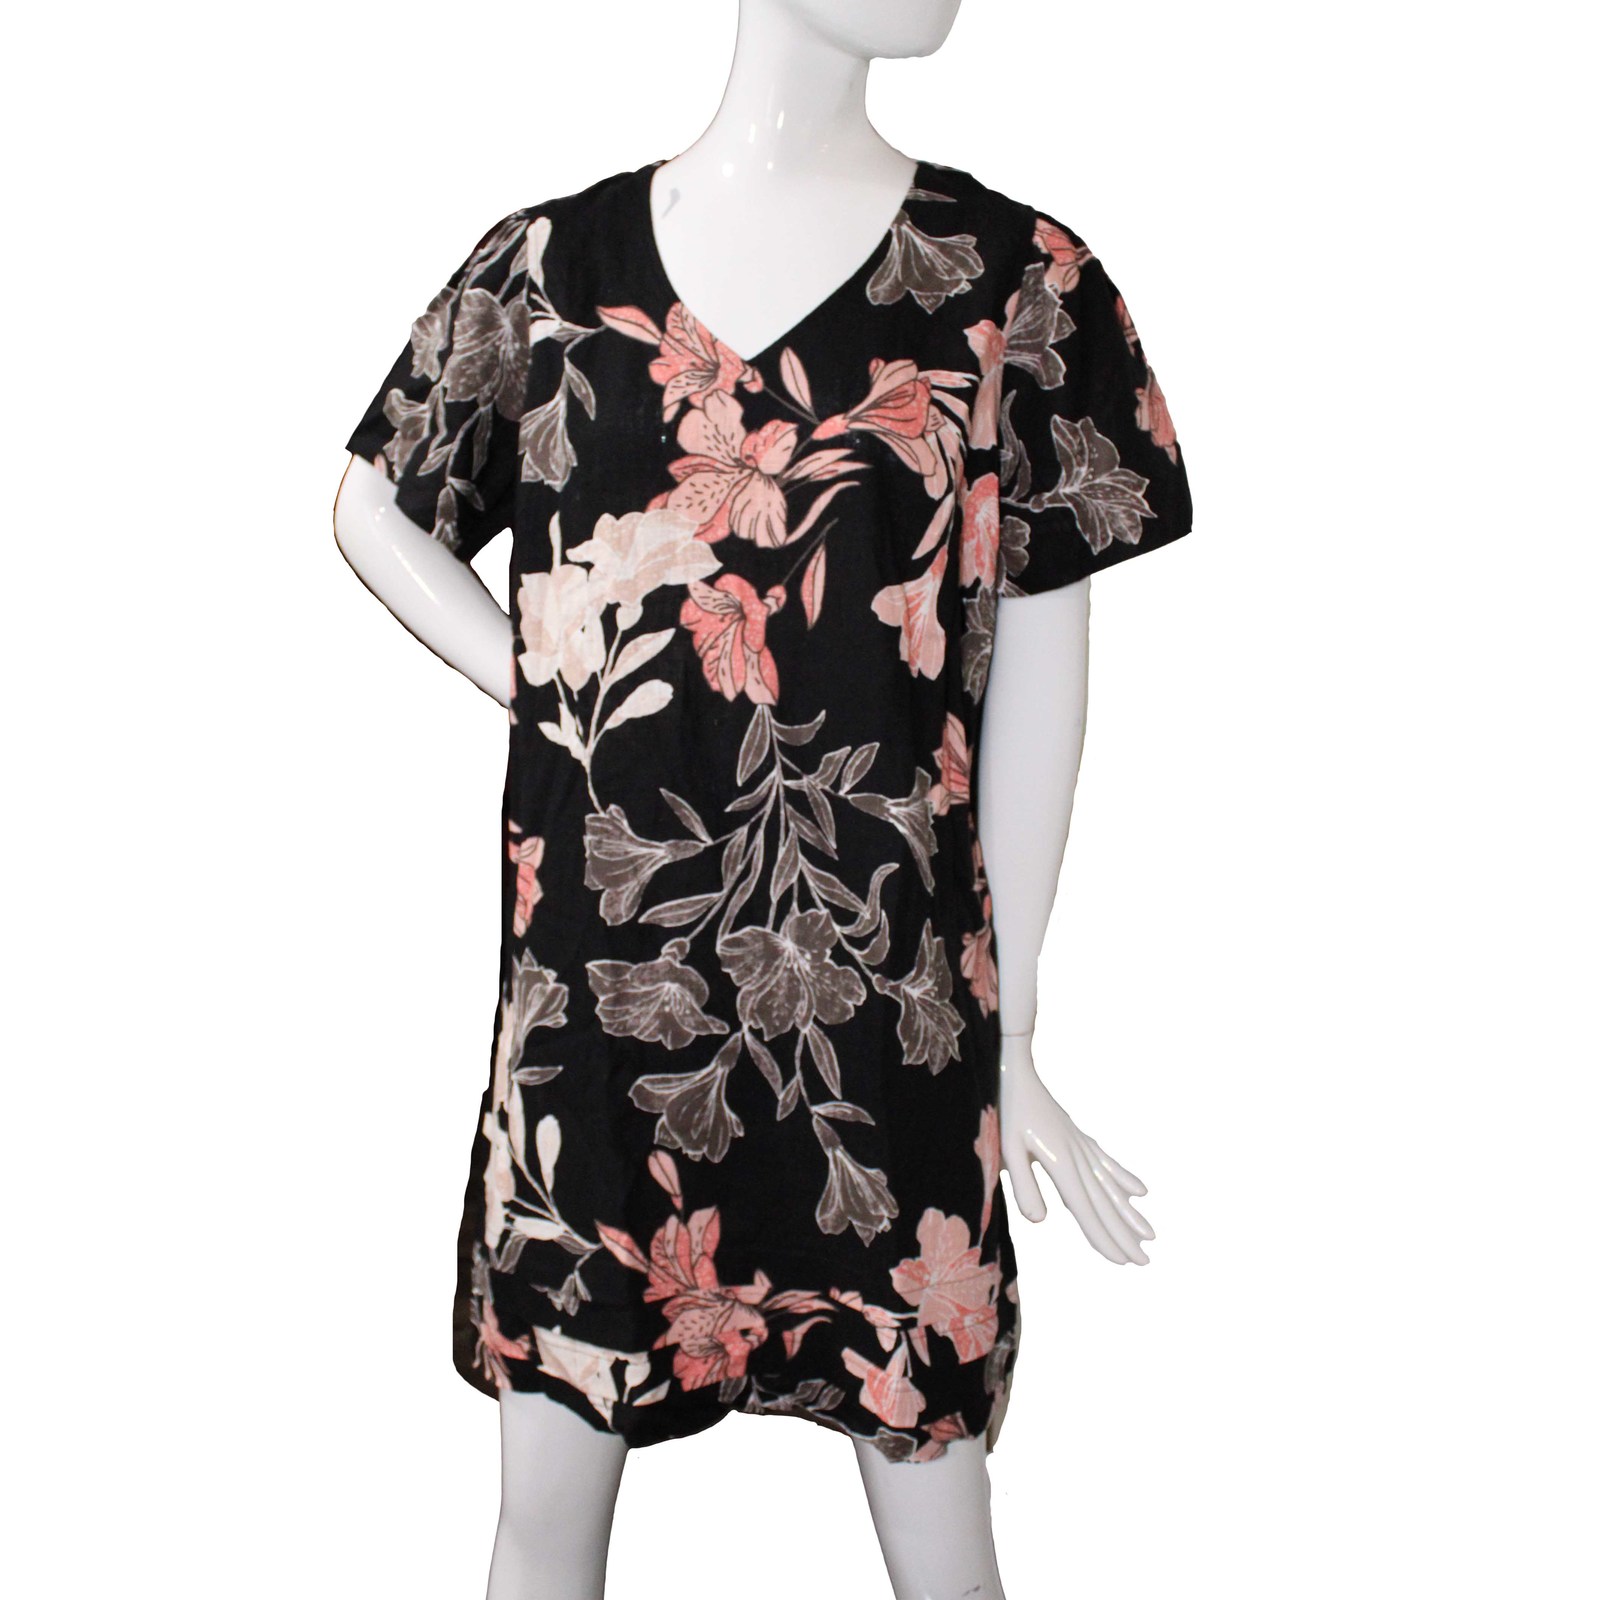 Primary image for Nicole Miller Ladies' Size Small Linen Blend Dress, Black Floral